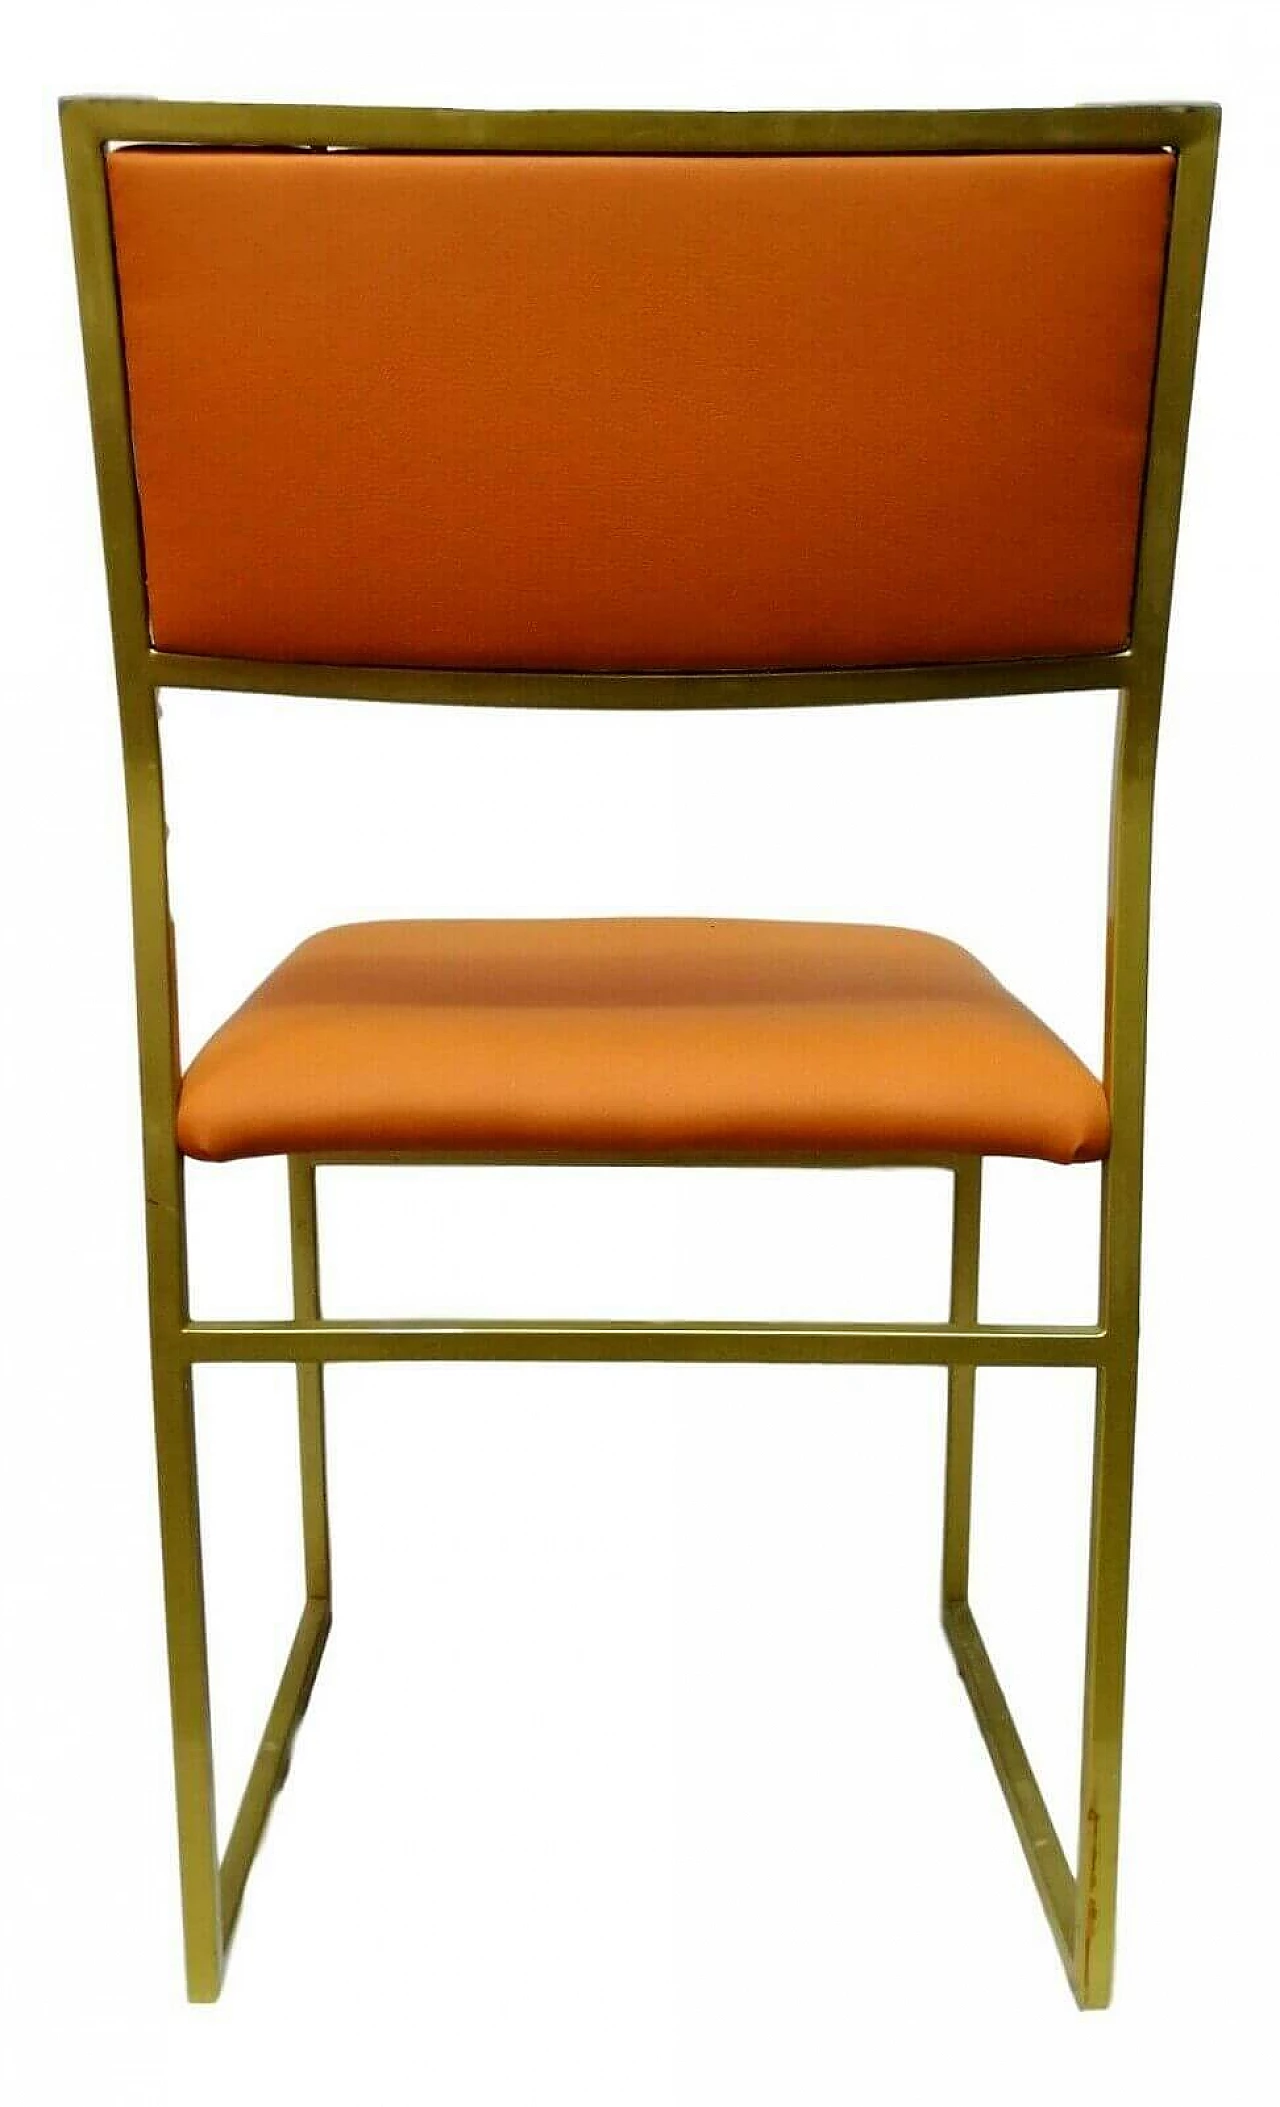 Metal chair and apricot-colored seat, 70s 1166230